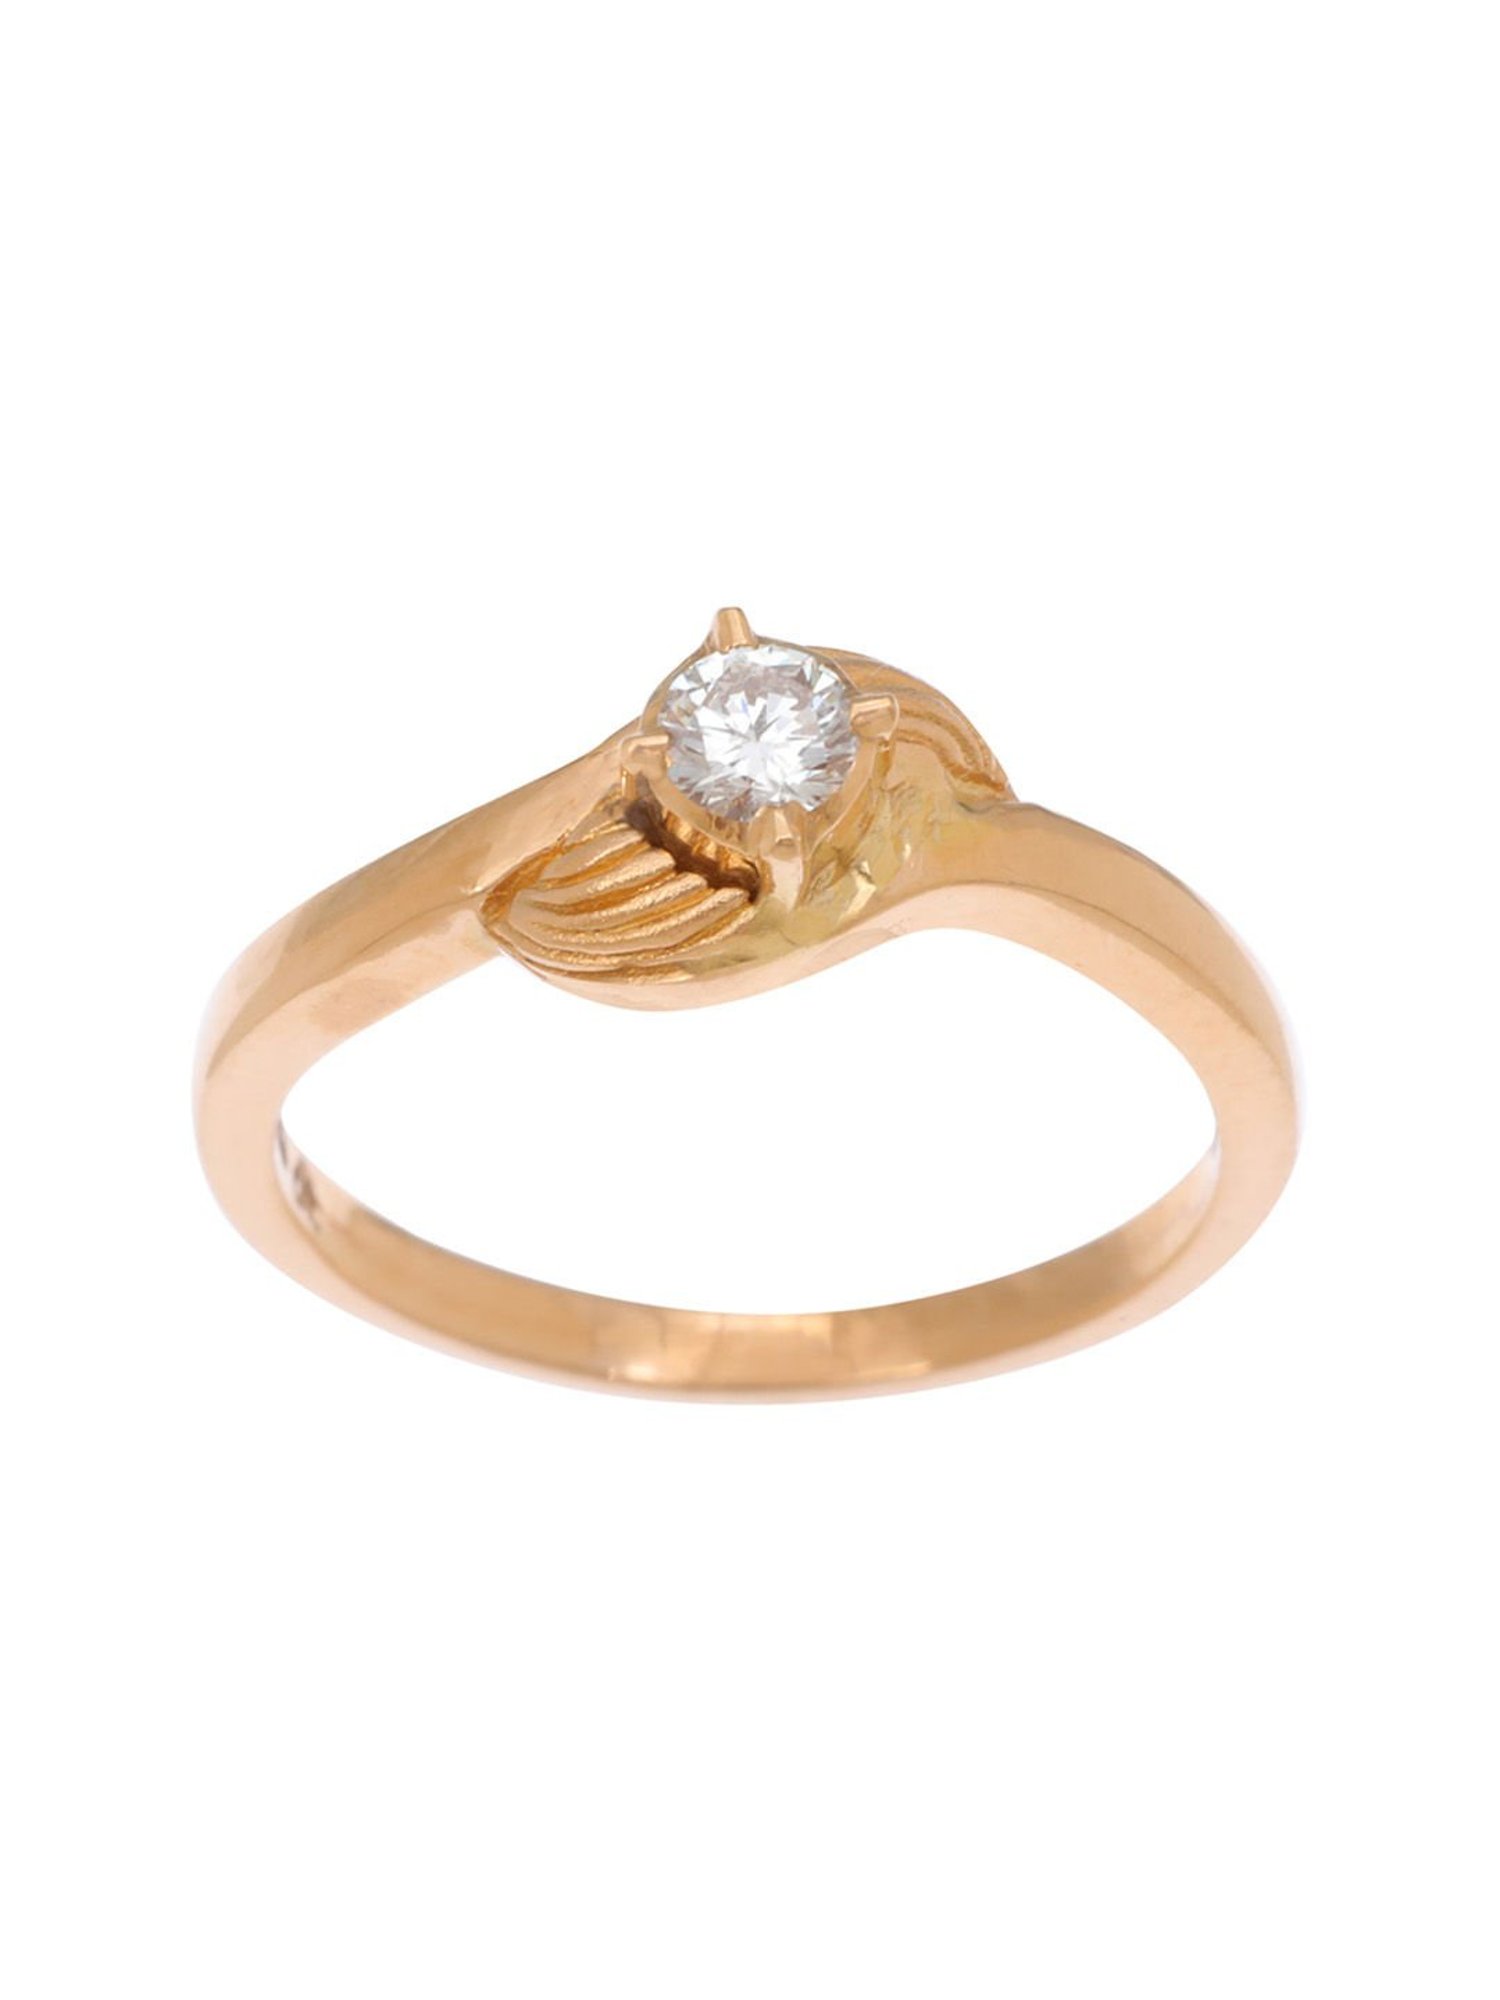 Celtic Solitaire Ring Crafted In 14k Yellow Gold, Set With A Single Stone  Brilliant Cut Diamond